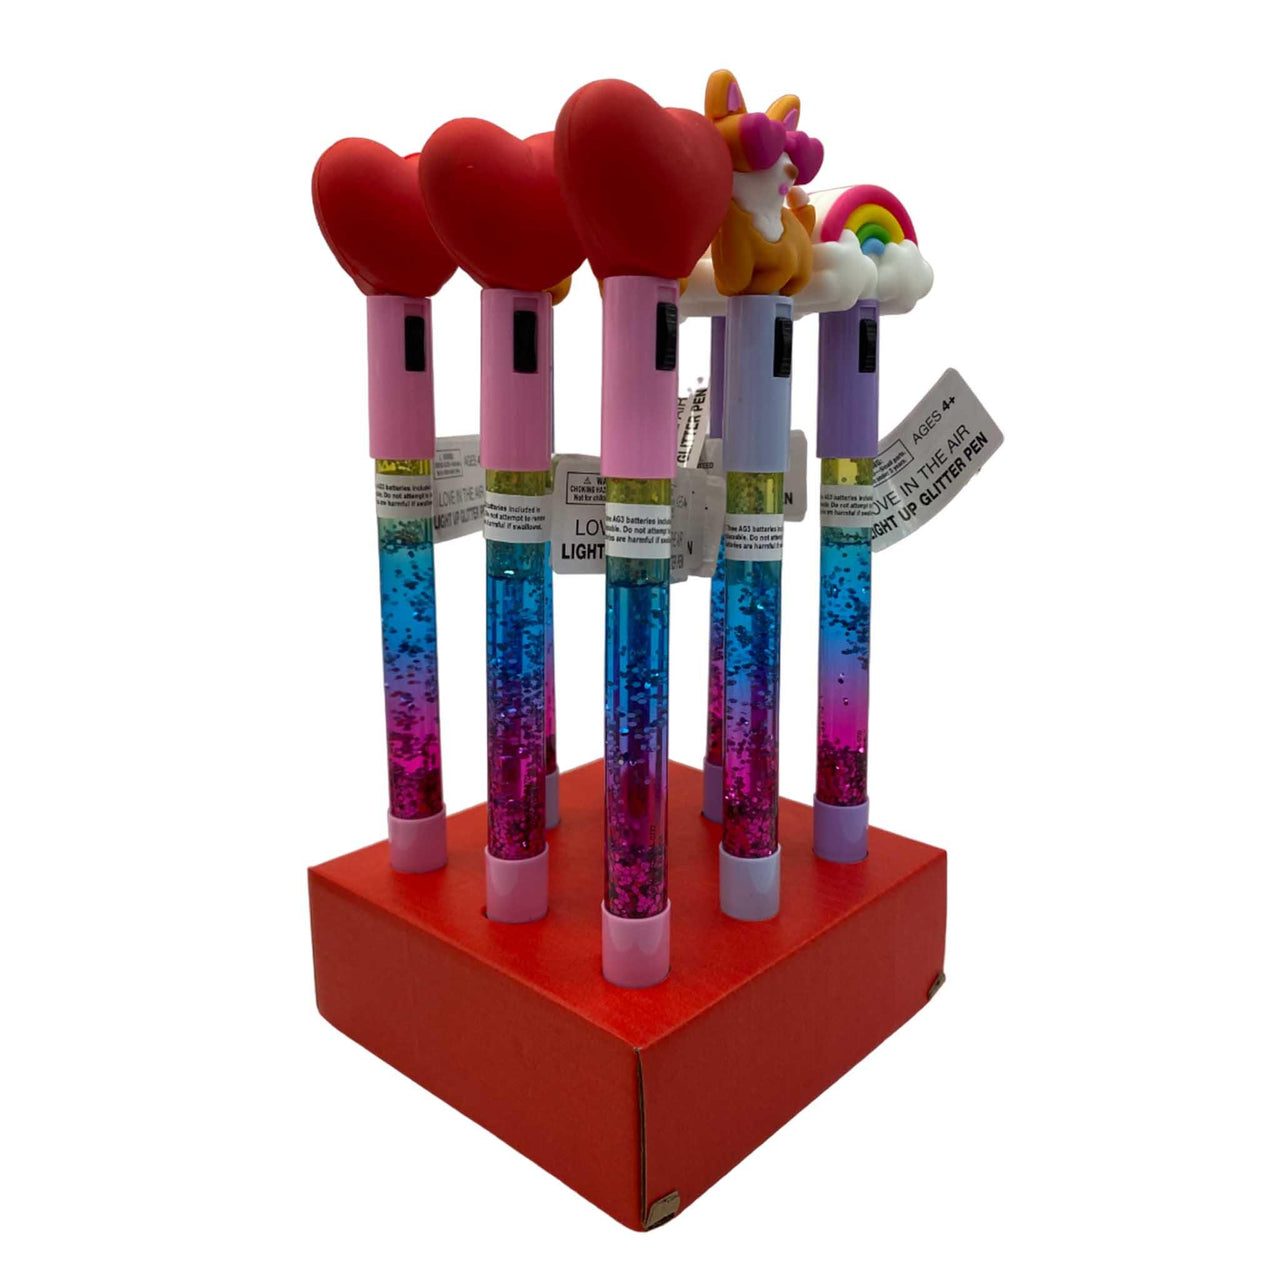 Toys Love In The Air Pens (36 Pcs Box) - Discount Wholesalers Inc